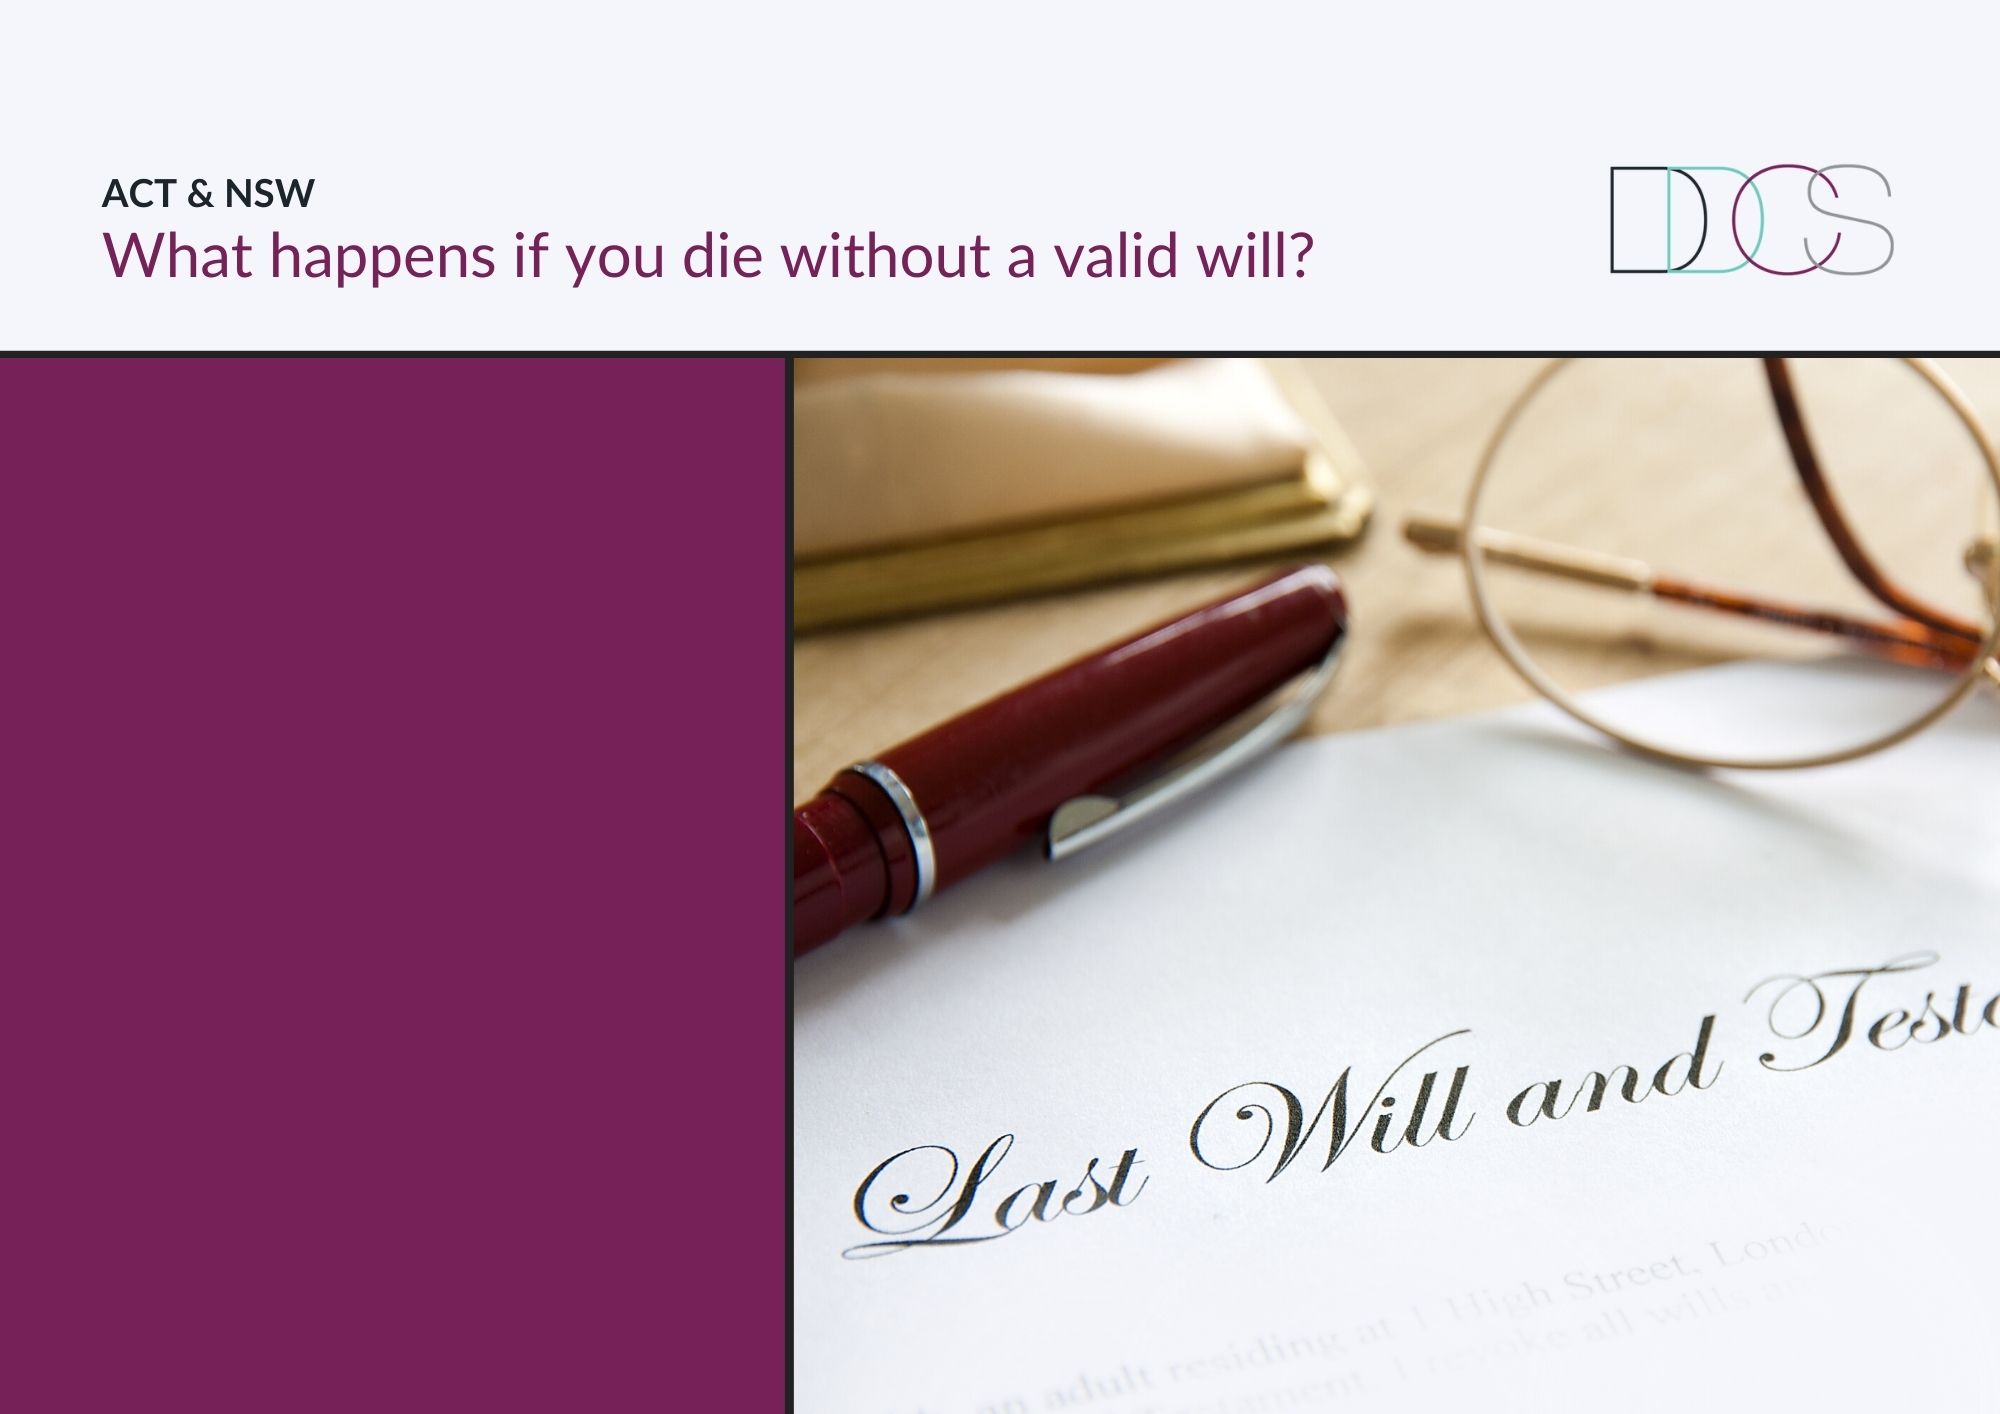 what-happens-if-you-die-without-a-vaild-will-ddcs-lawyers